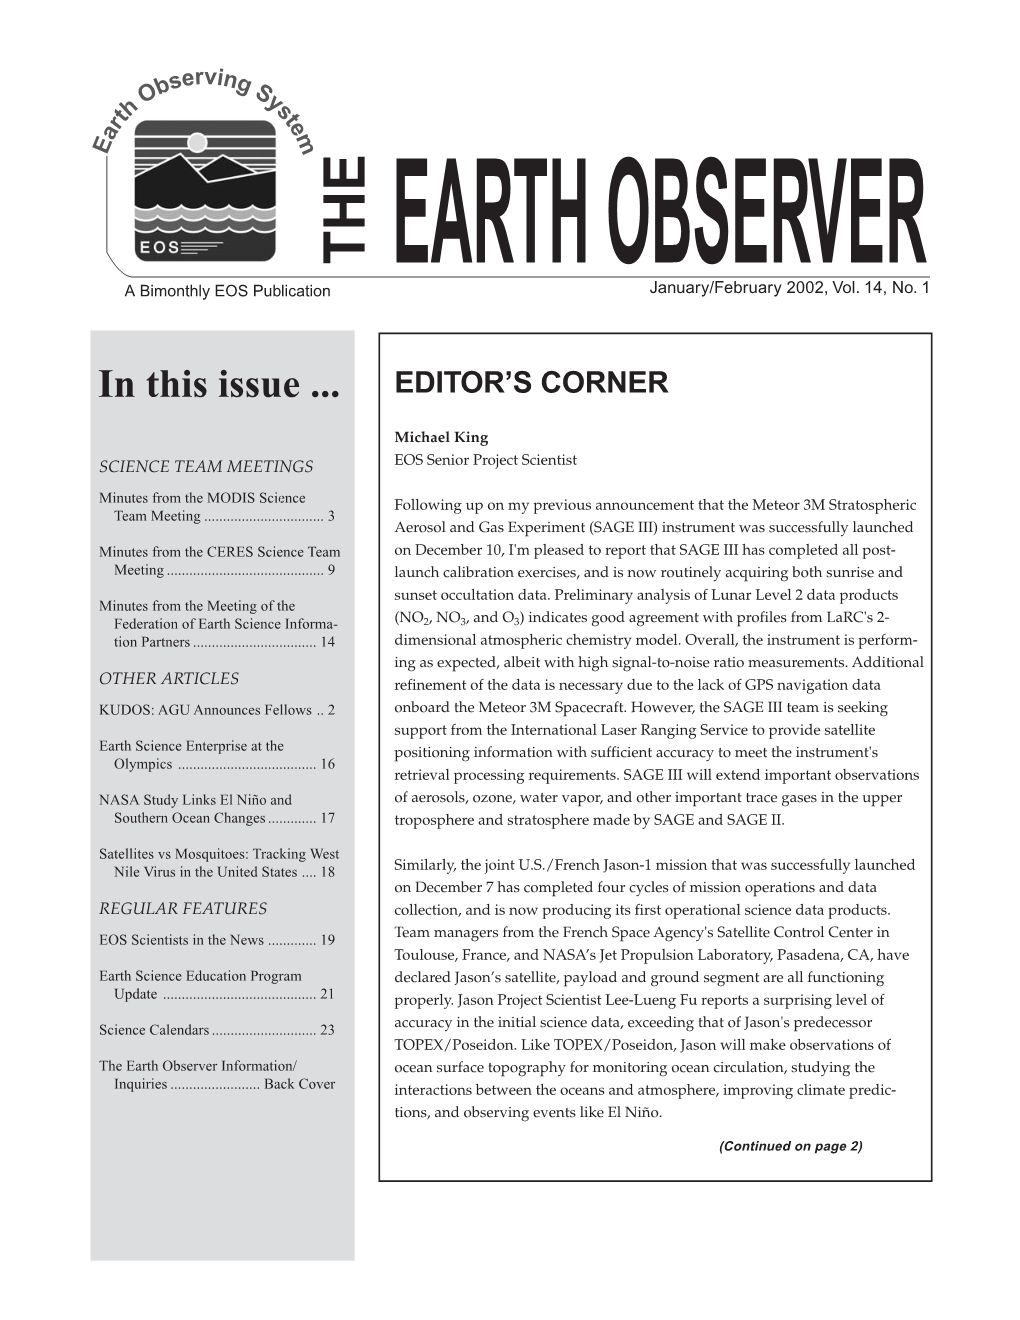 THE EARTH OBSERVER a Bimonthly EOS Publication January/February 2002, Vol